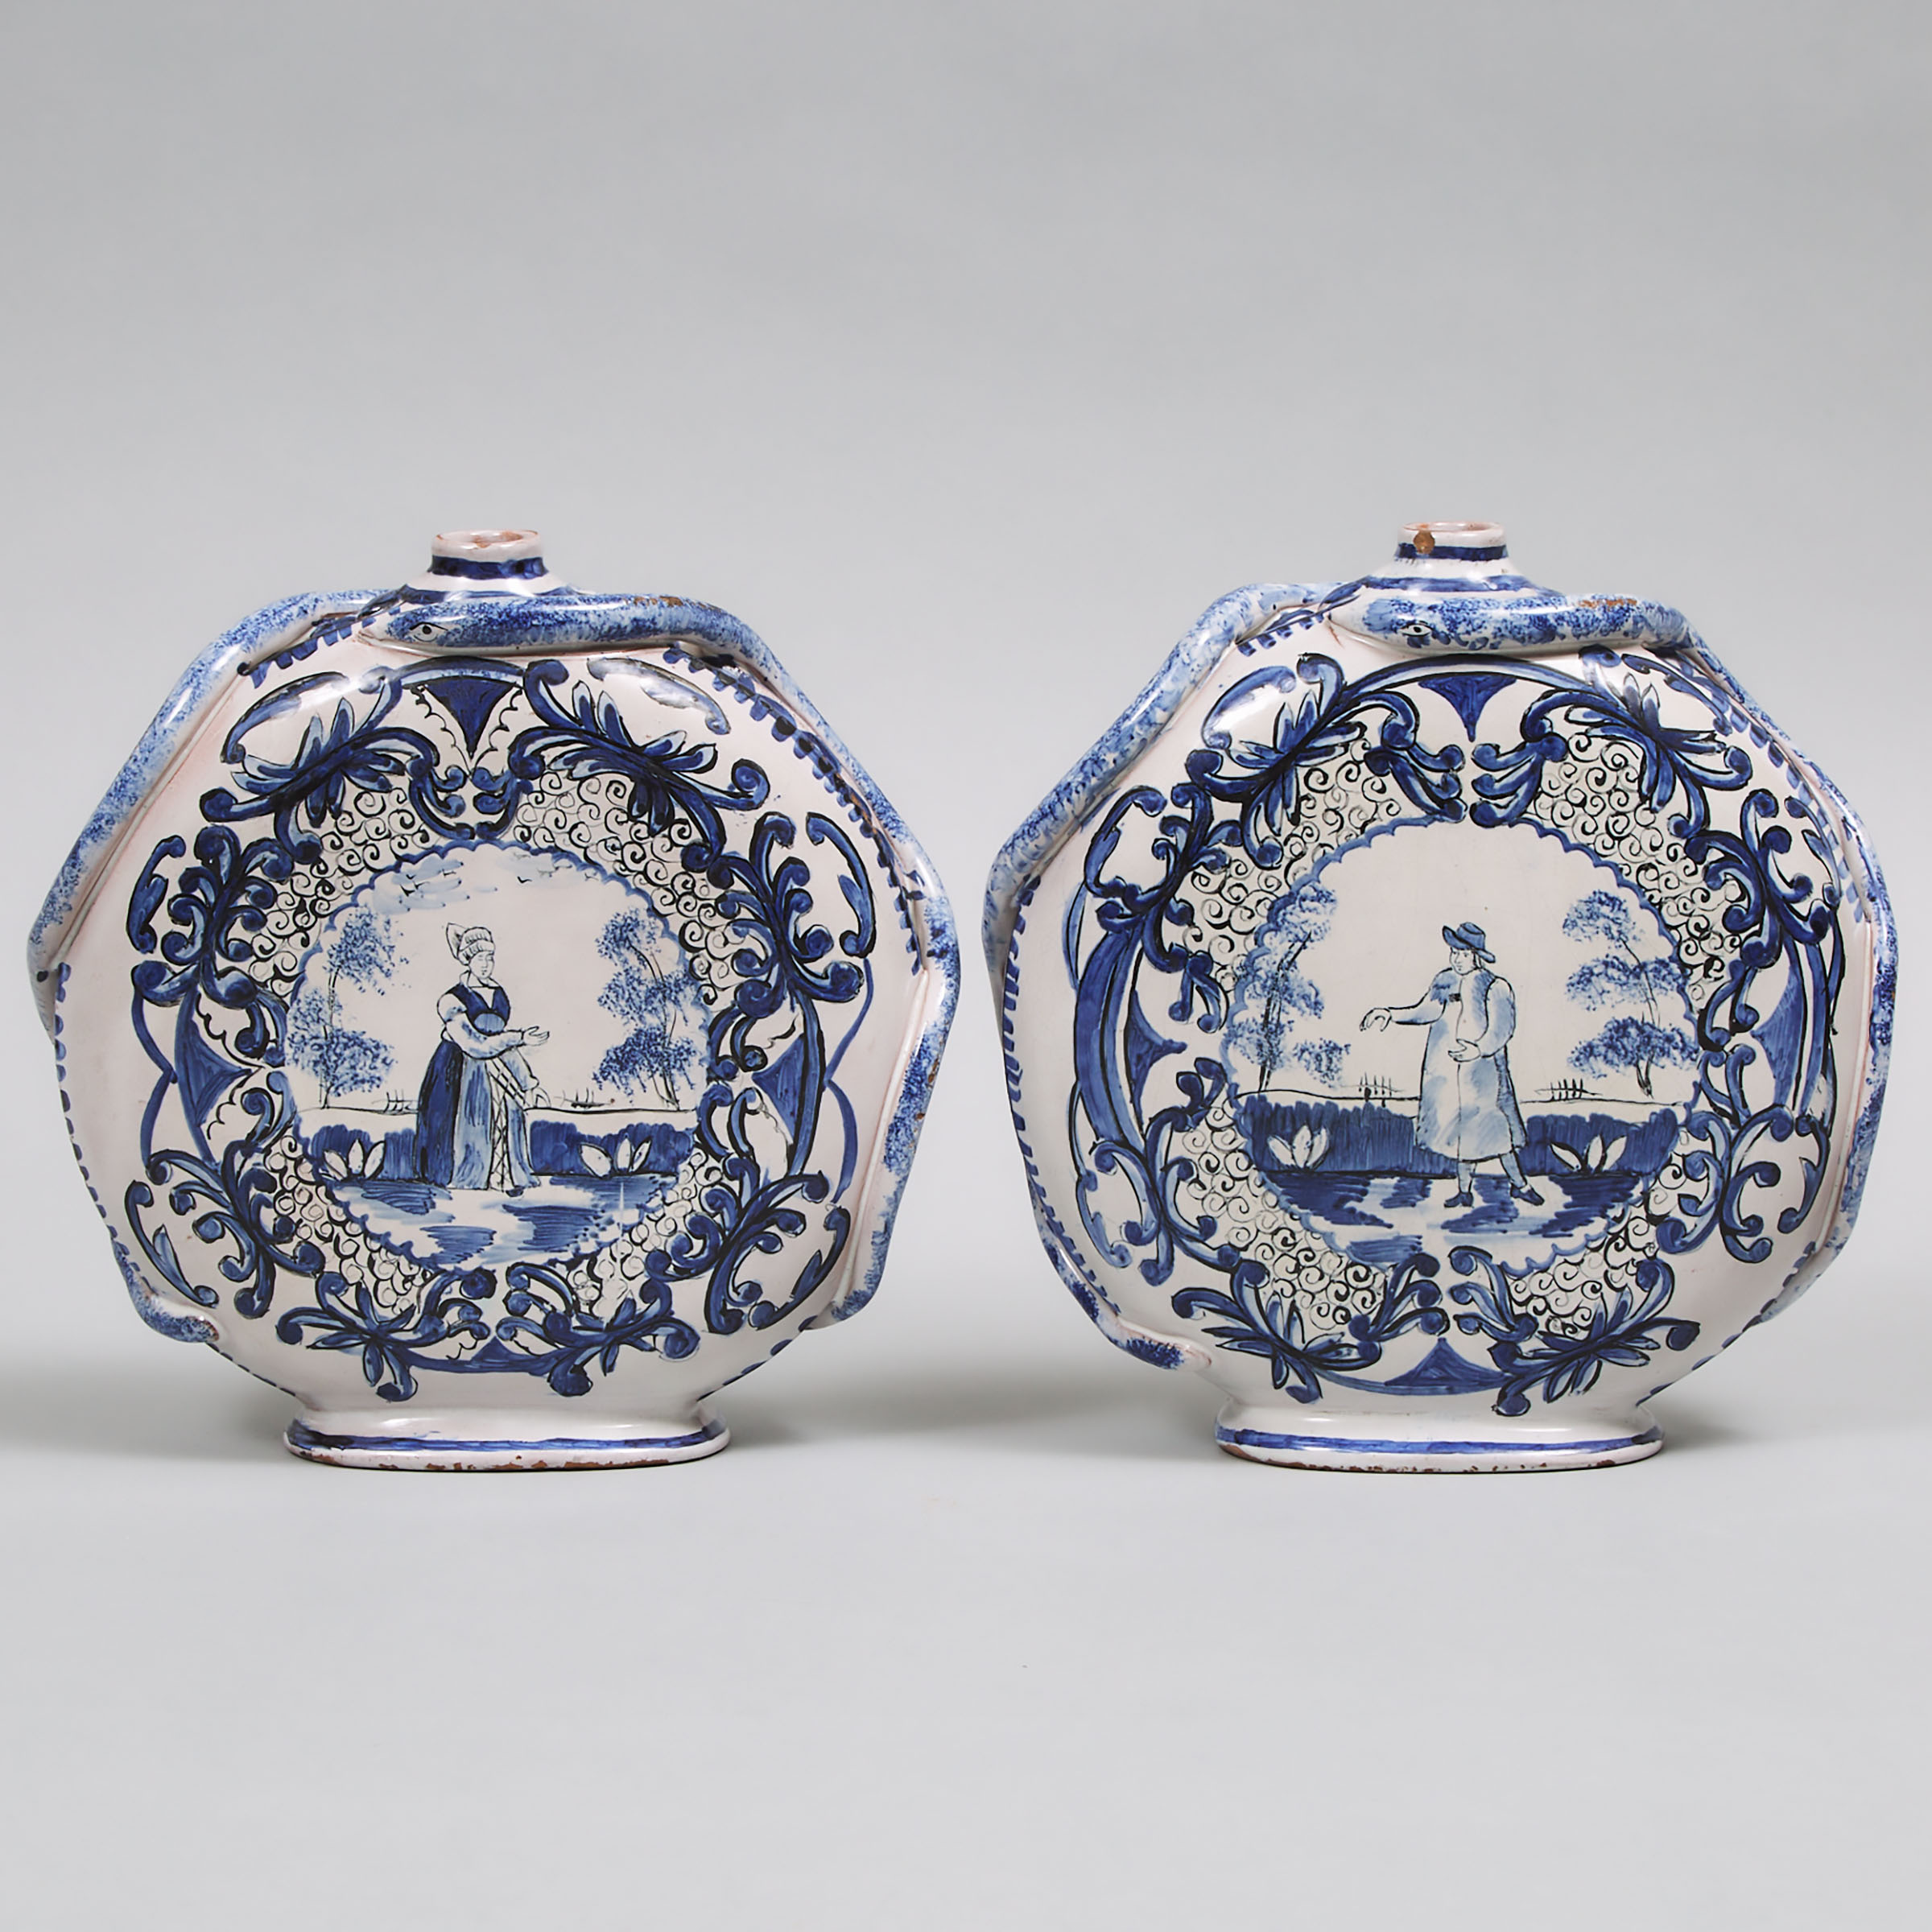 Pair of Delft Blue Painted Serpent-Handled Moon Flasks, late 18th/19th century